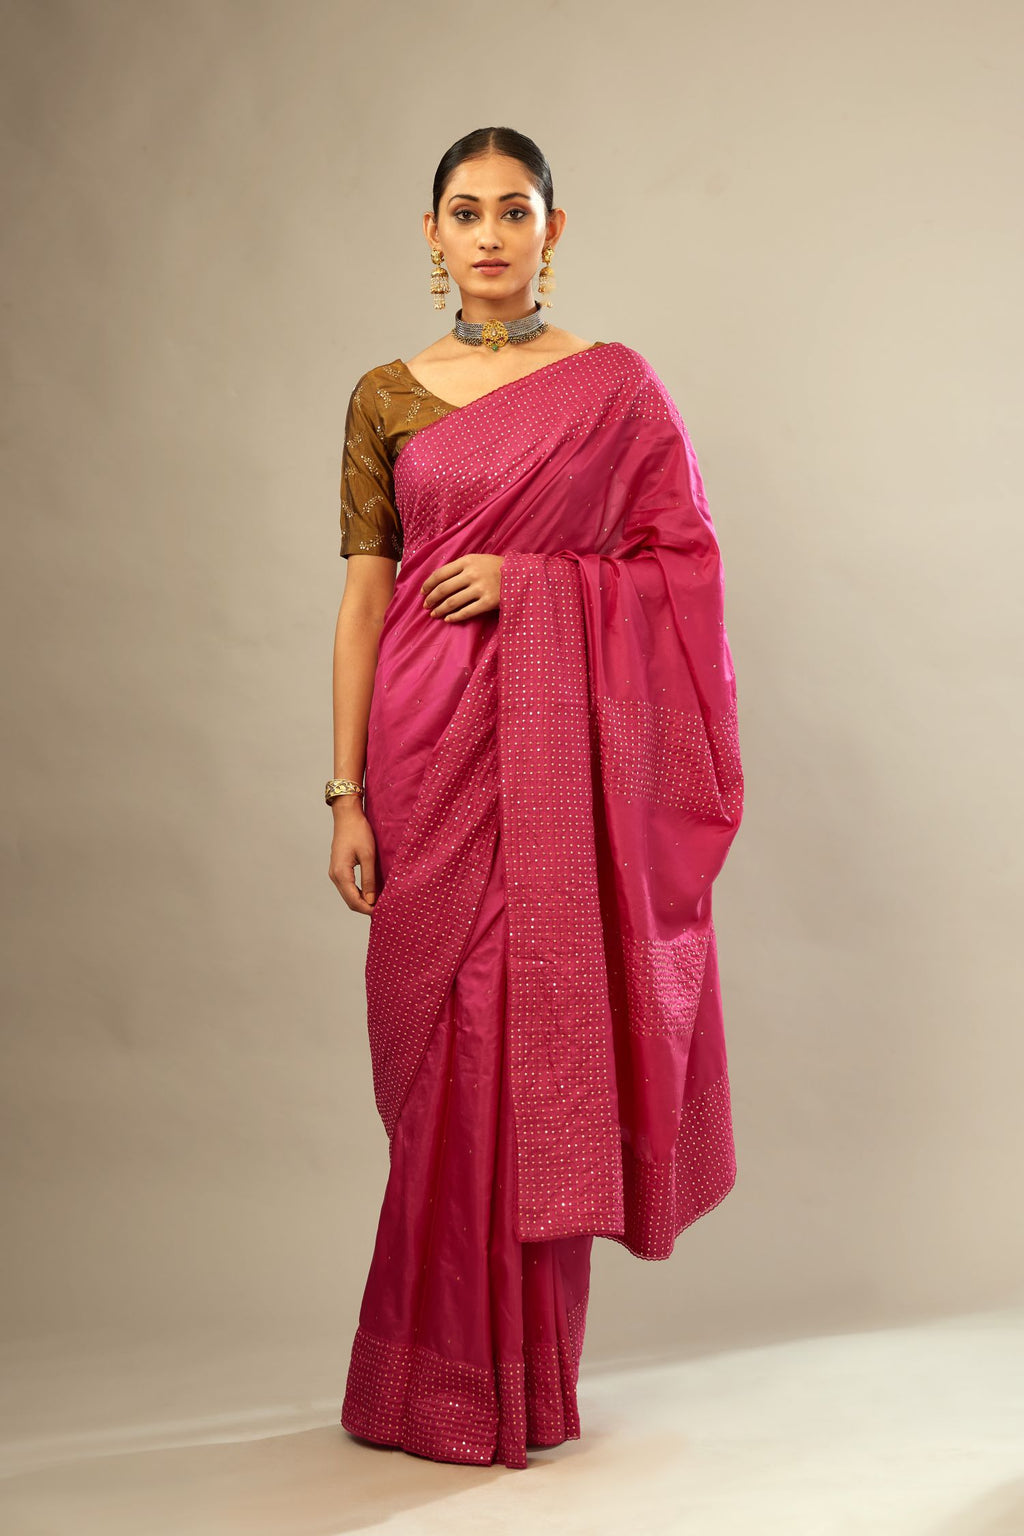 Jazzberry jam silk saree set with a broad border of hand embroidered geometrically aligned sequins and three horizontal bands at the pallu.